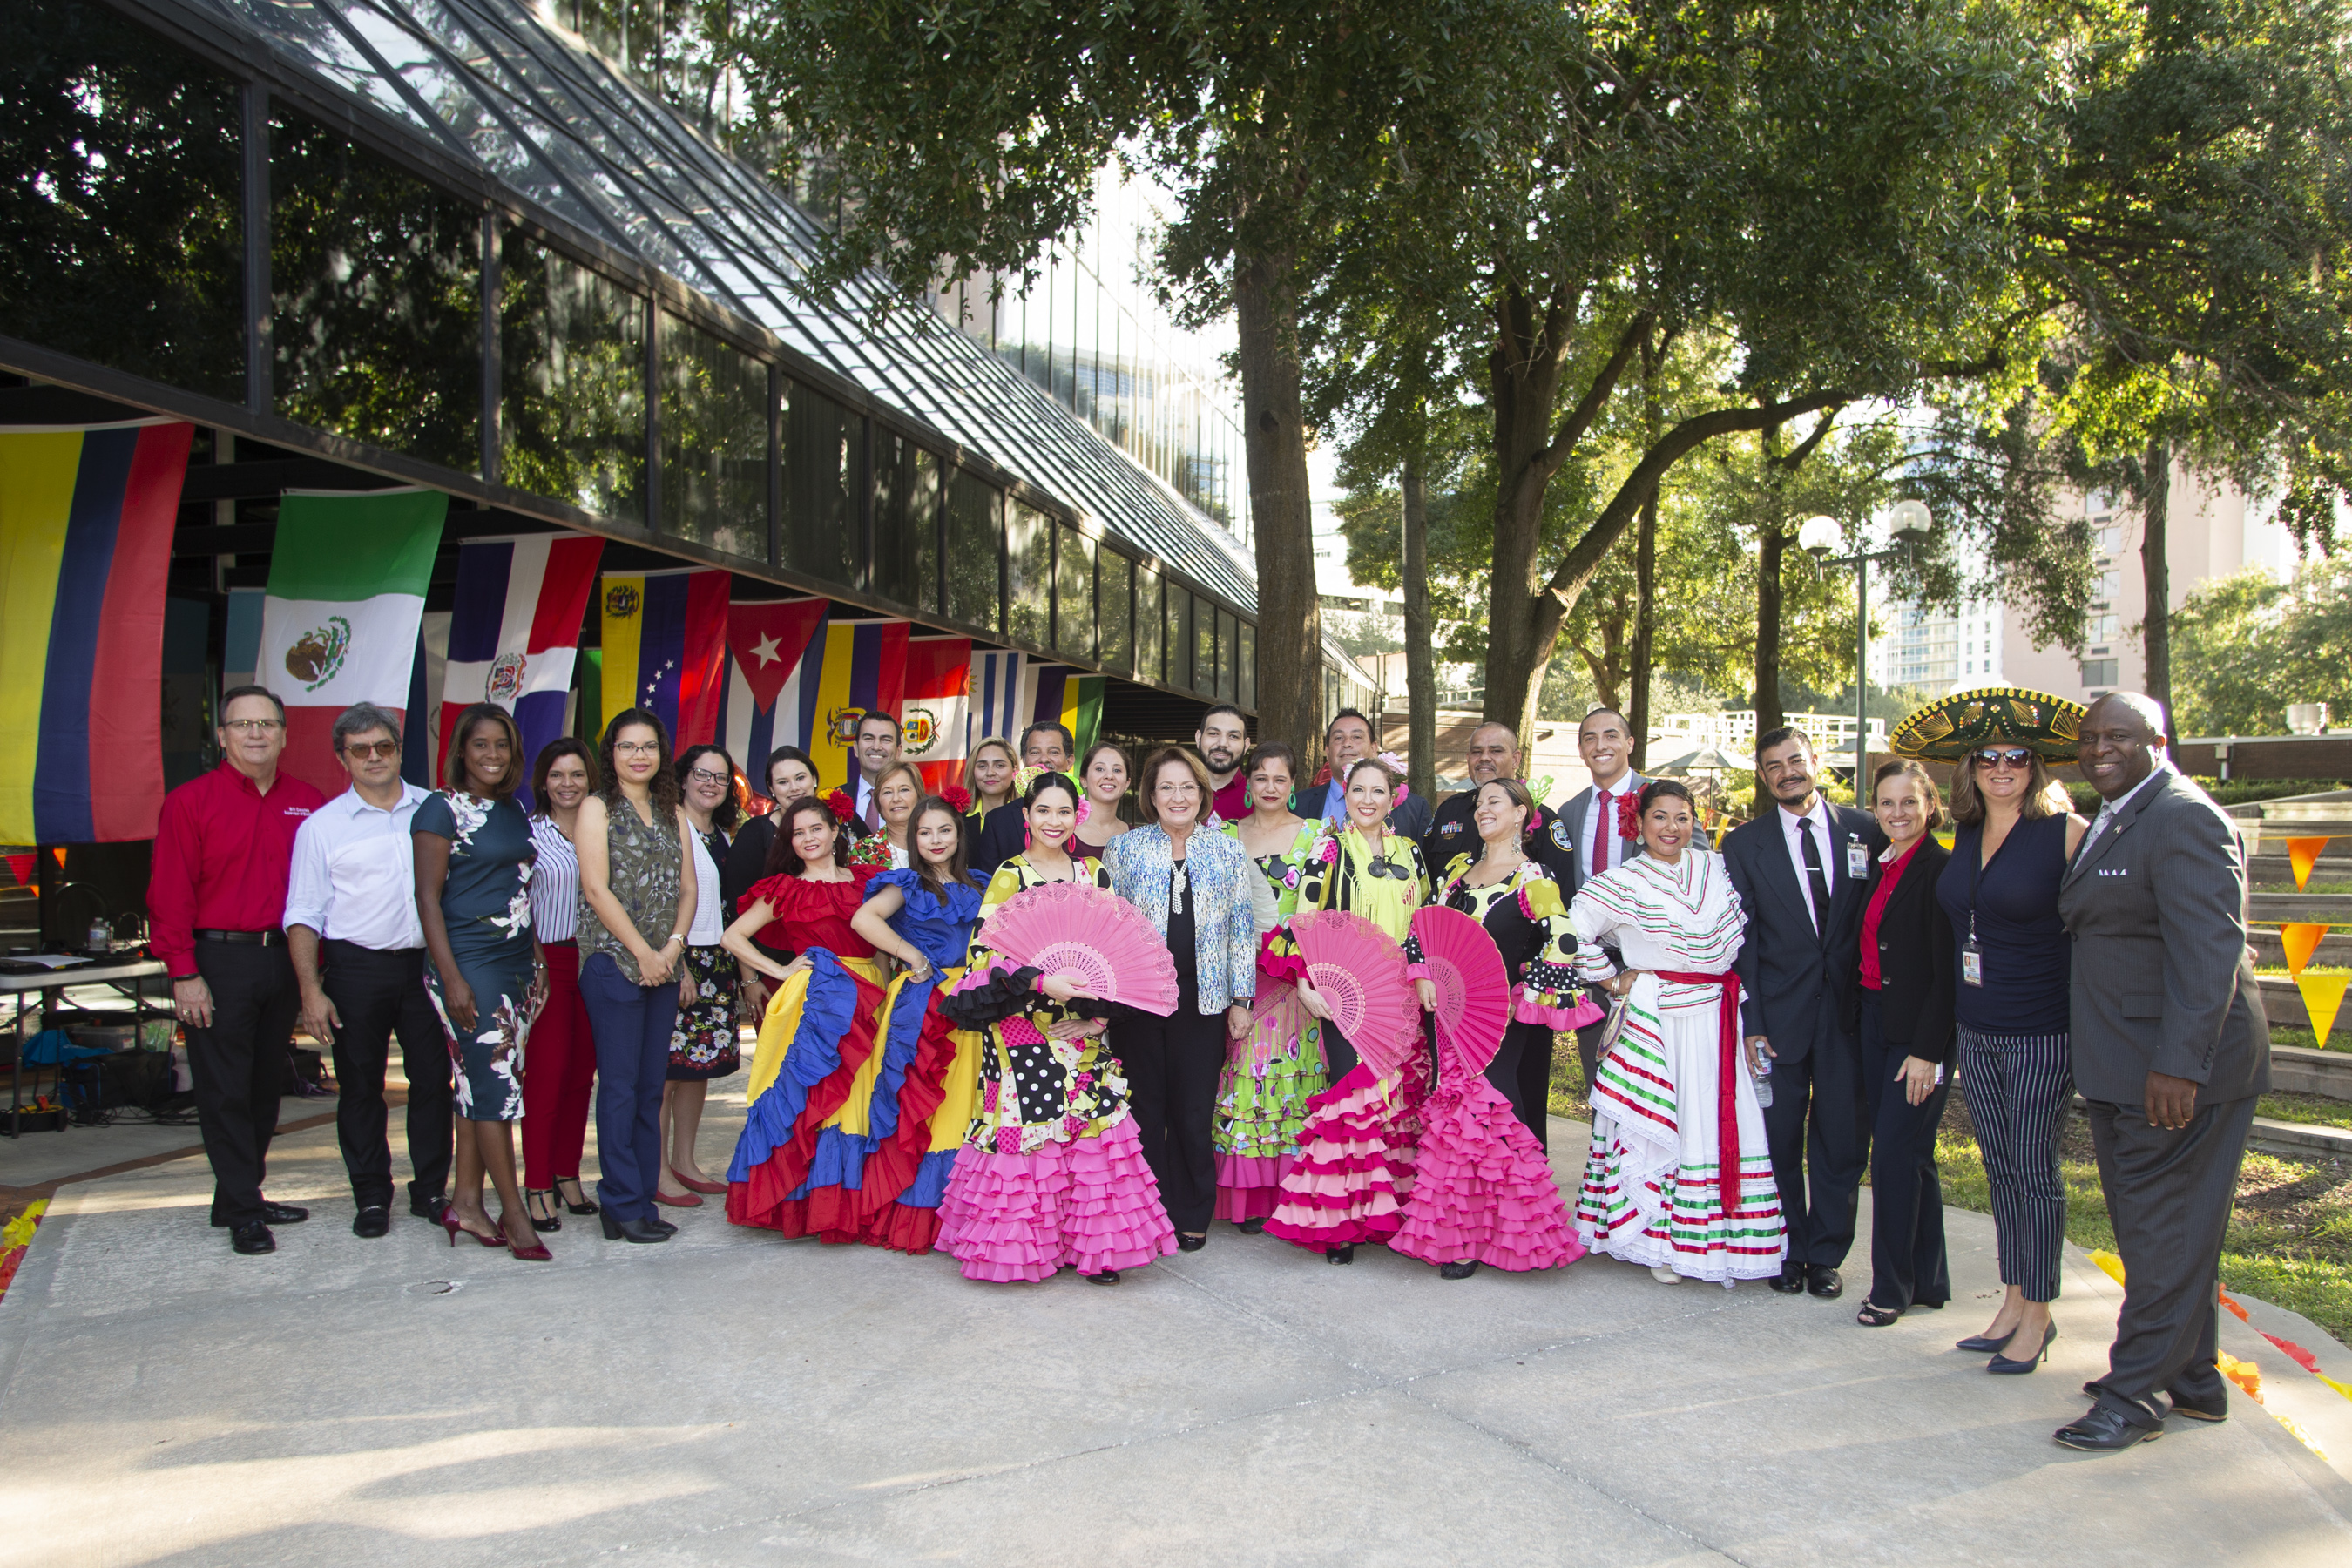 Group photo with county leaders, the hispanic heritage committee, and performers